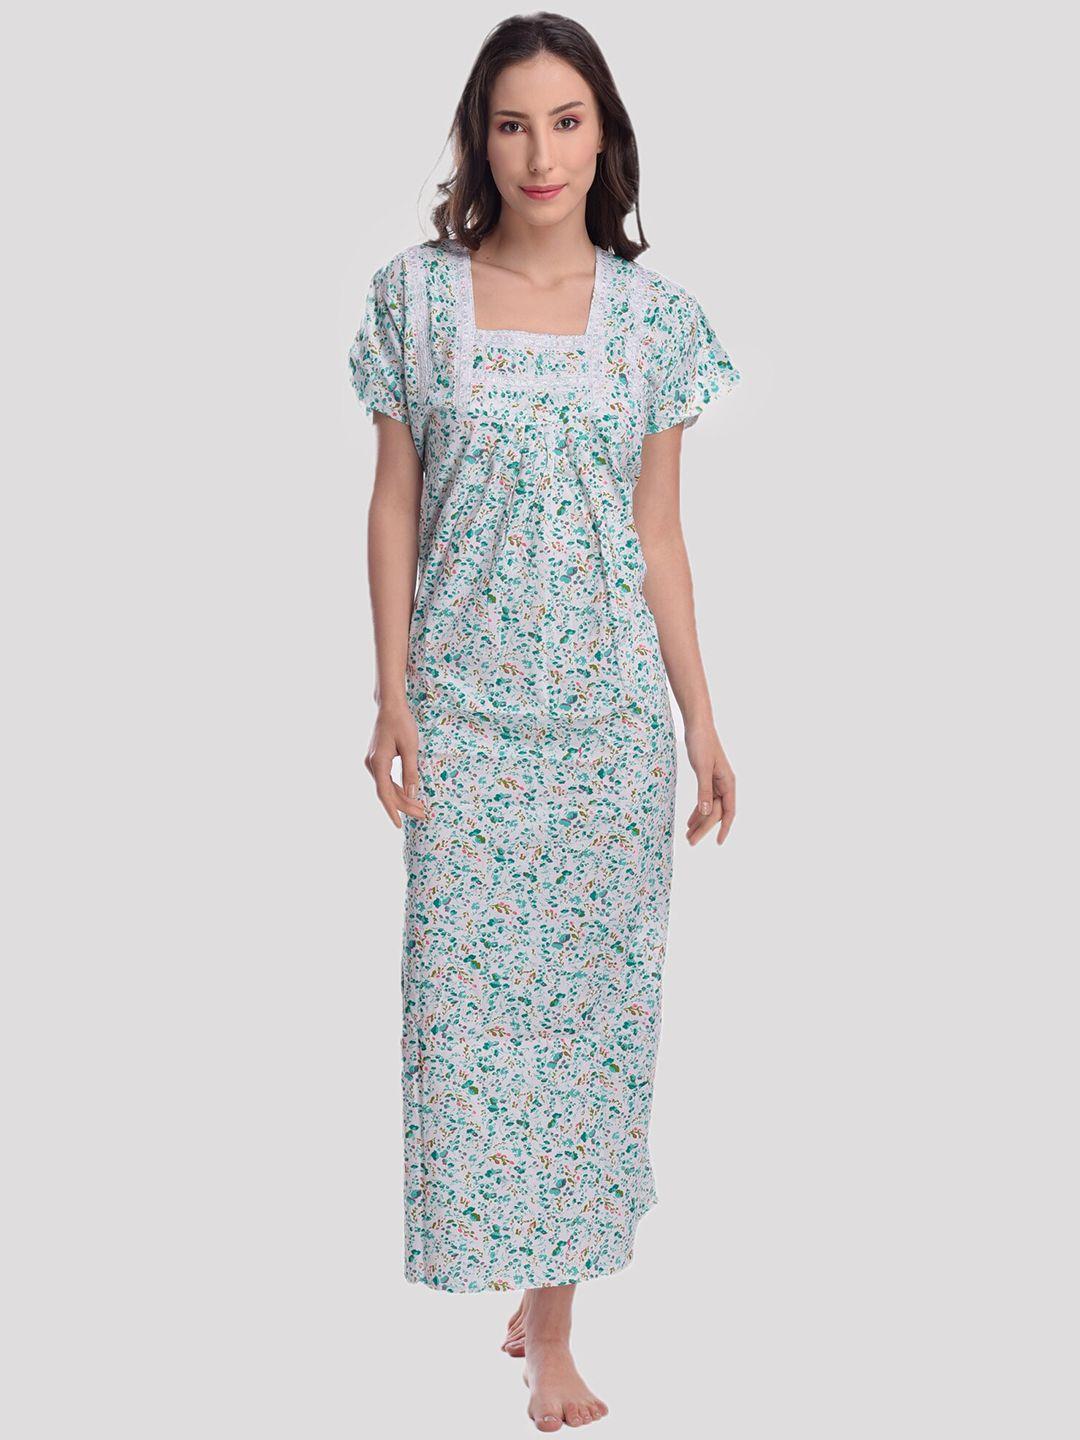 cierge green & white floral printed pure cotton maxi nightdress